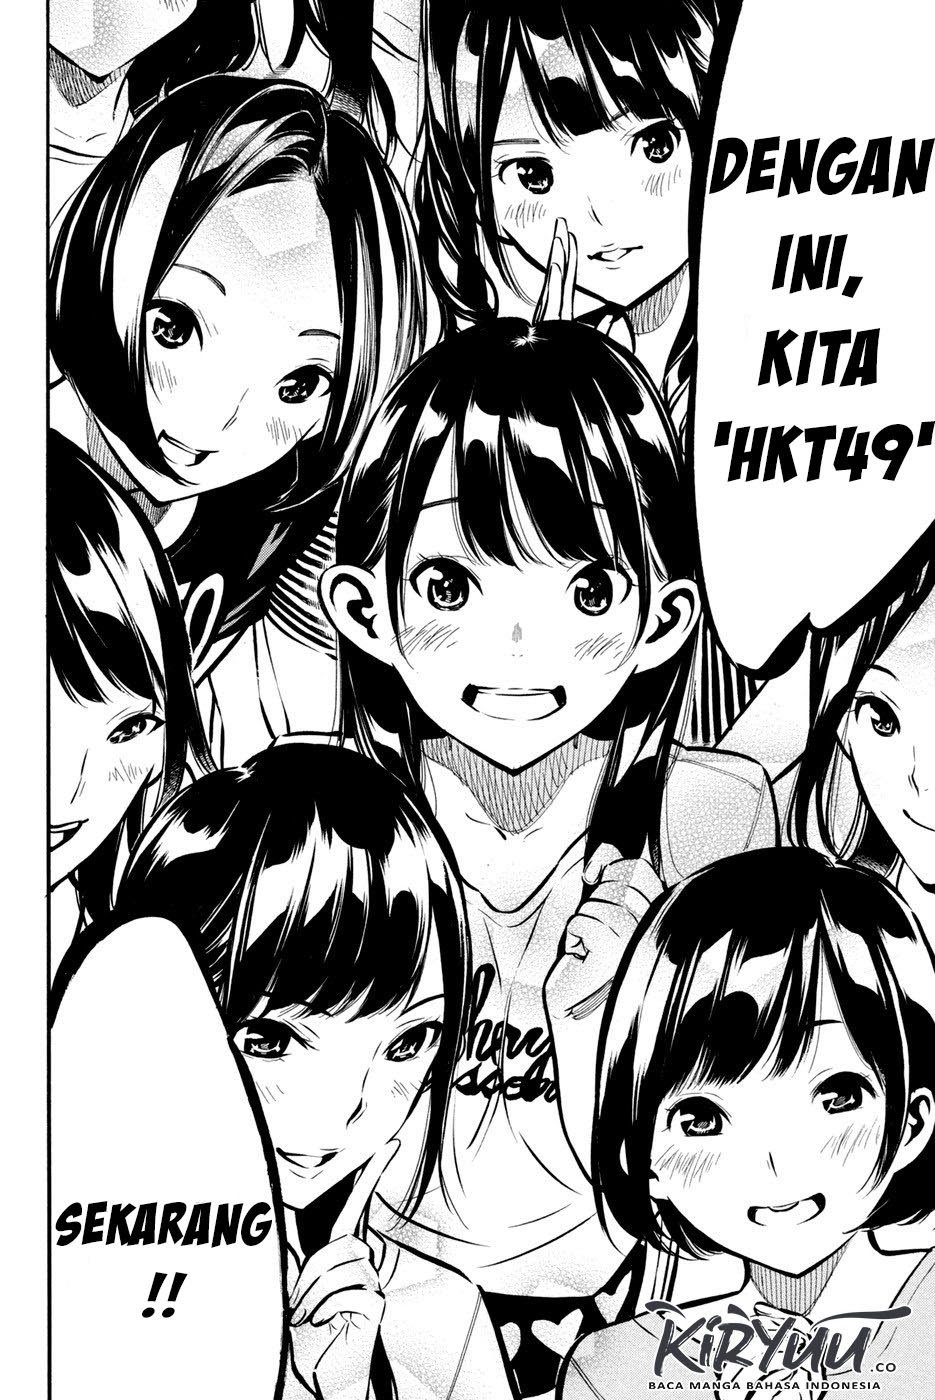 AKB 49 Chapter 182